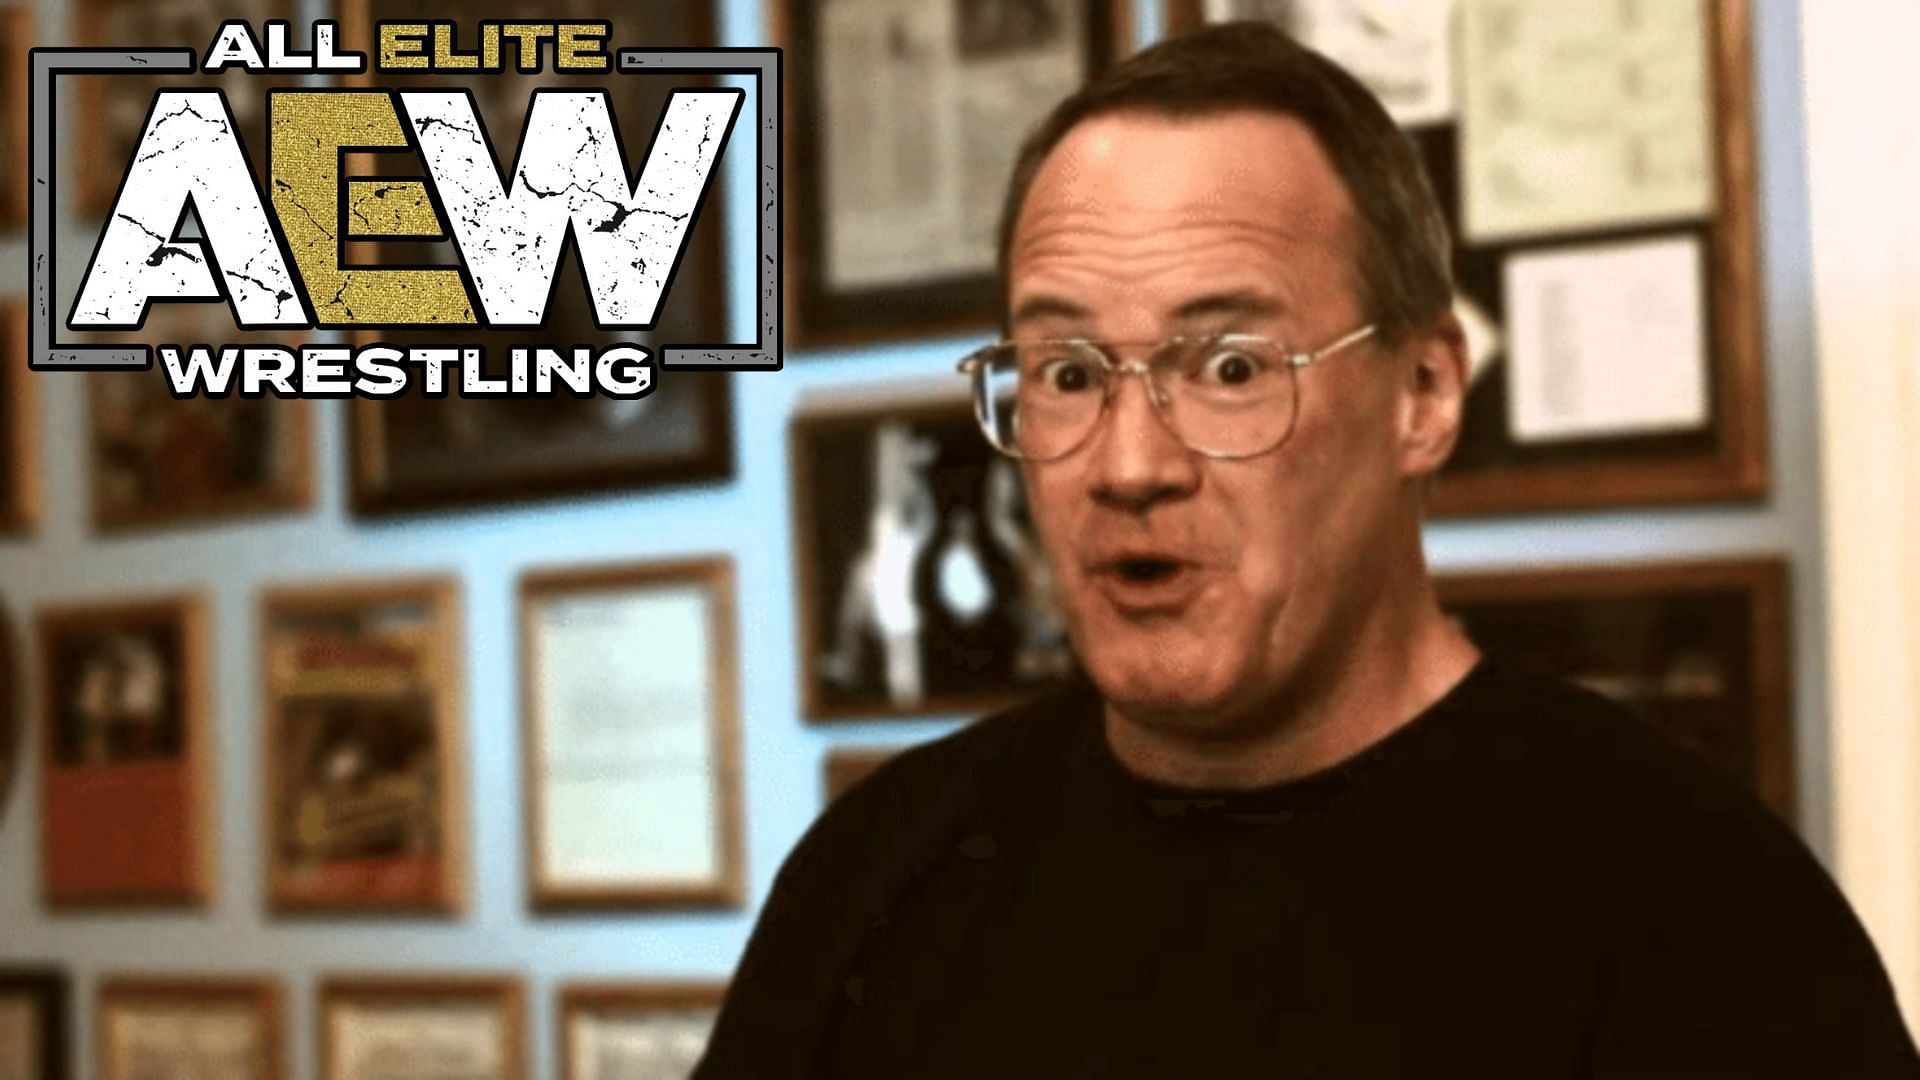 This star has caught the attention and praise of Jim Cornette.